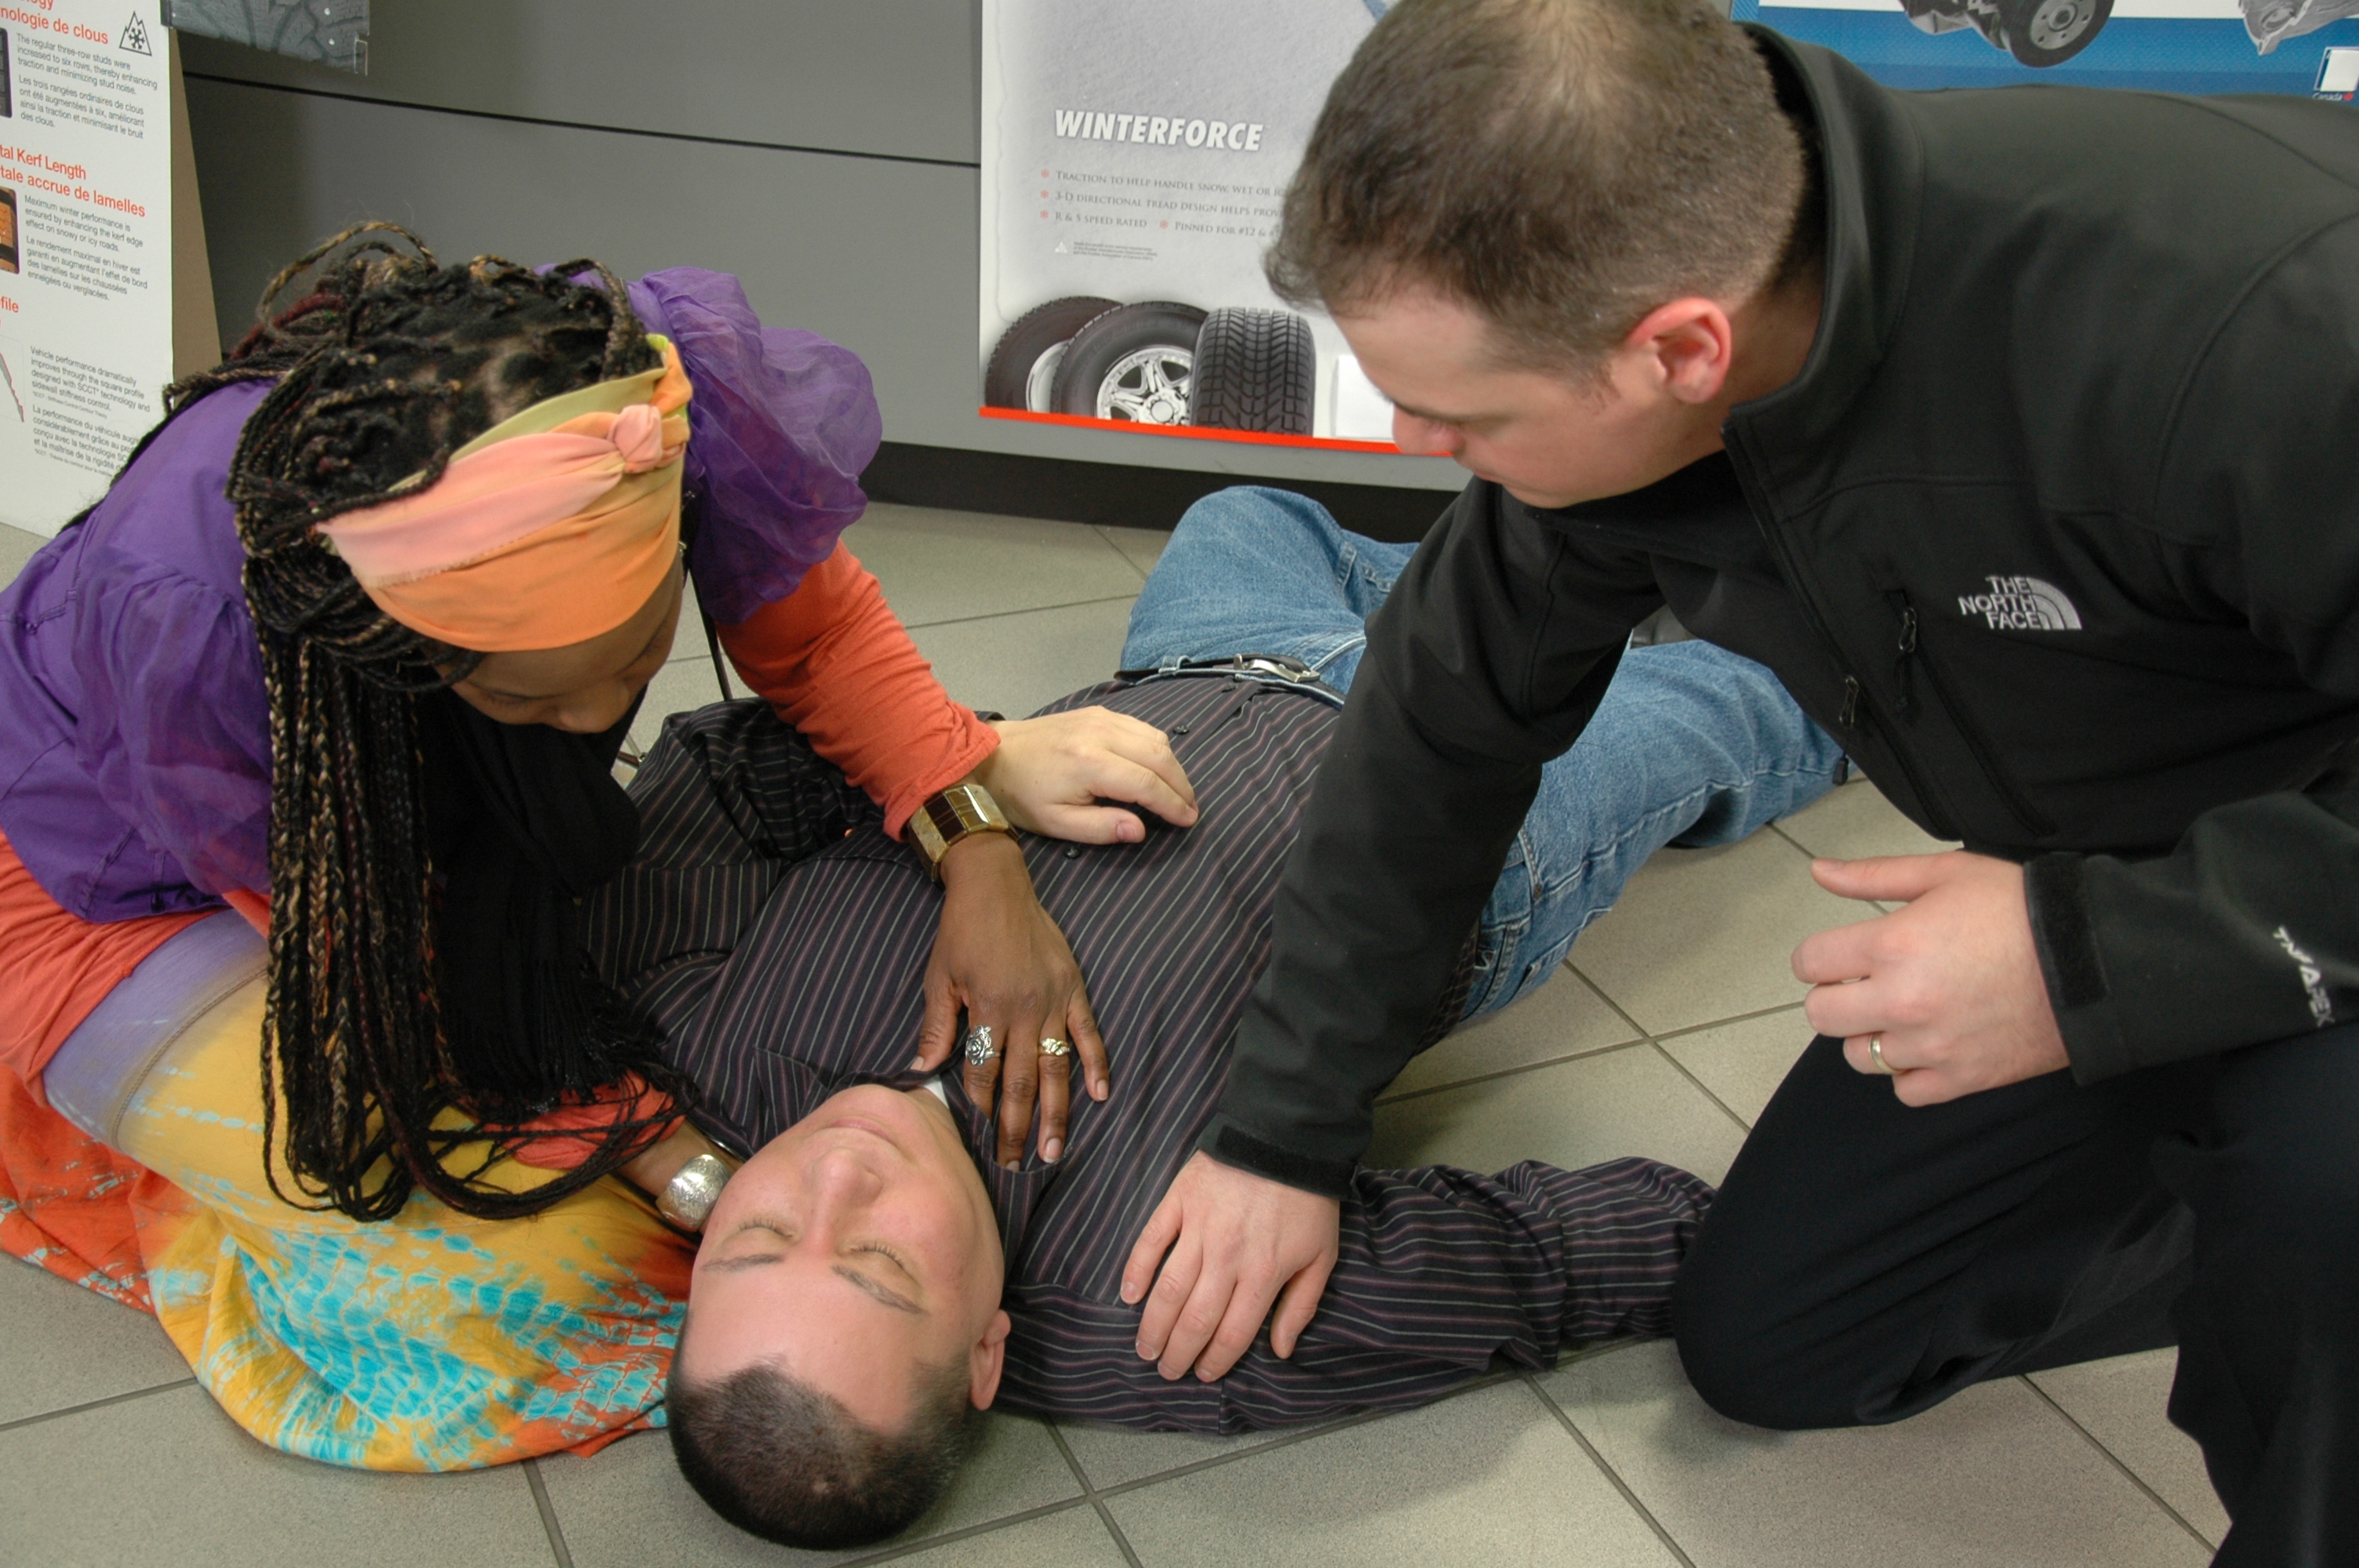 first aid training courses, first aid course, first aid training, cpr training, first aid certificate, first aid bournemouth, first aid poole, first aid dorset, first aid south east